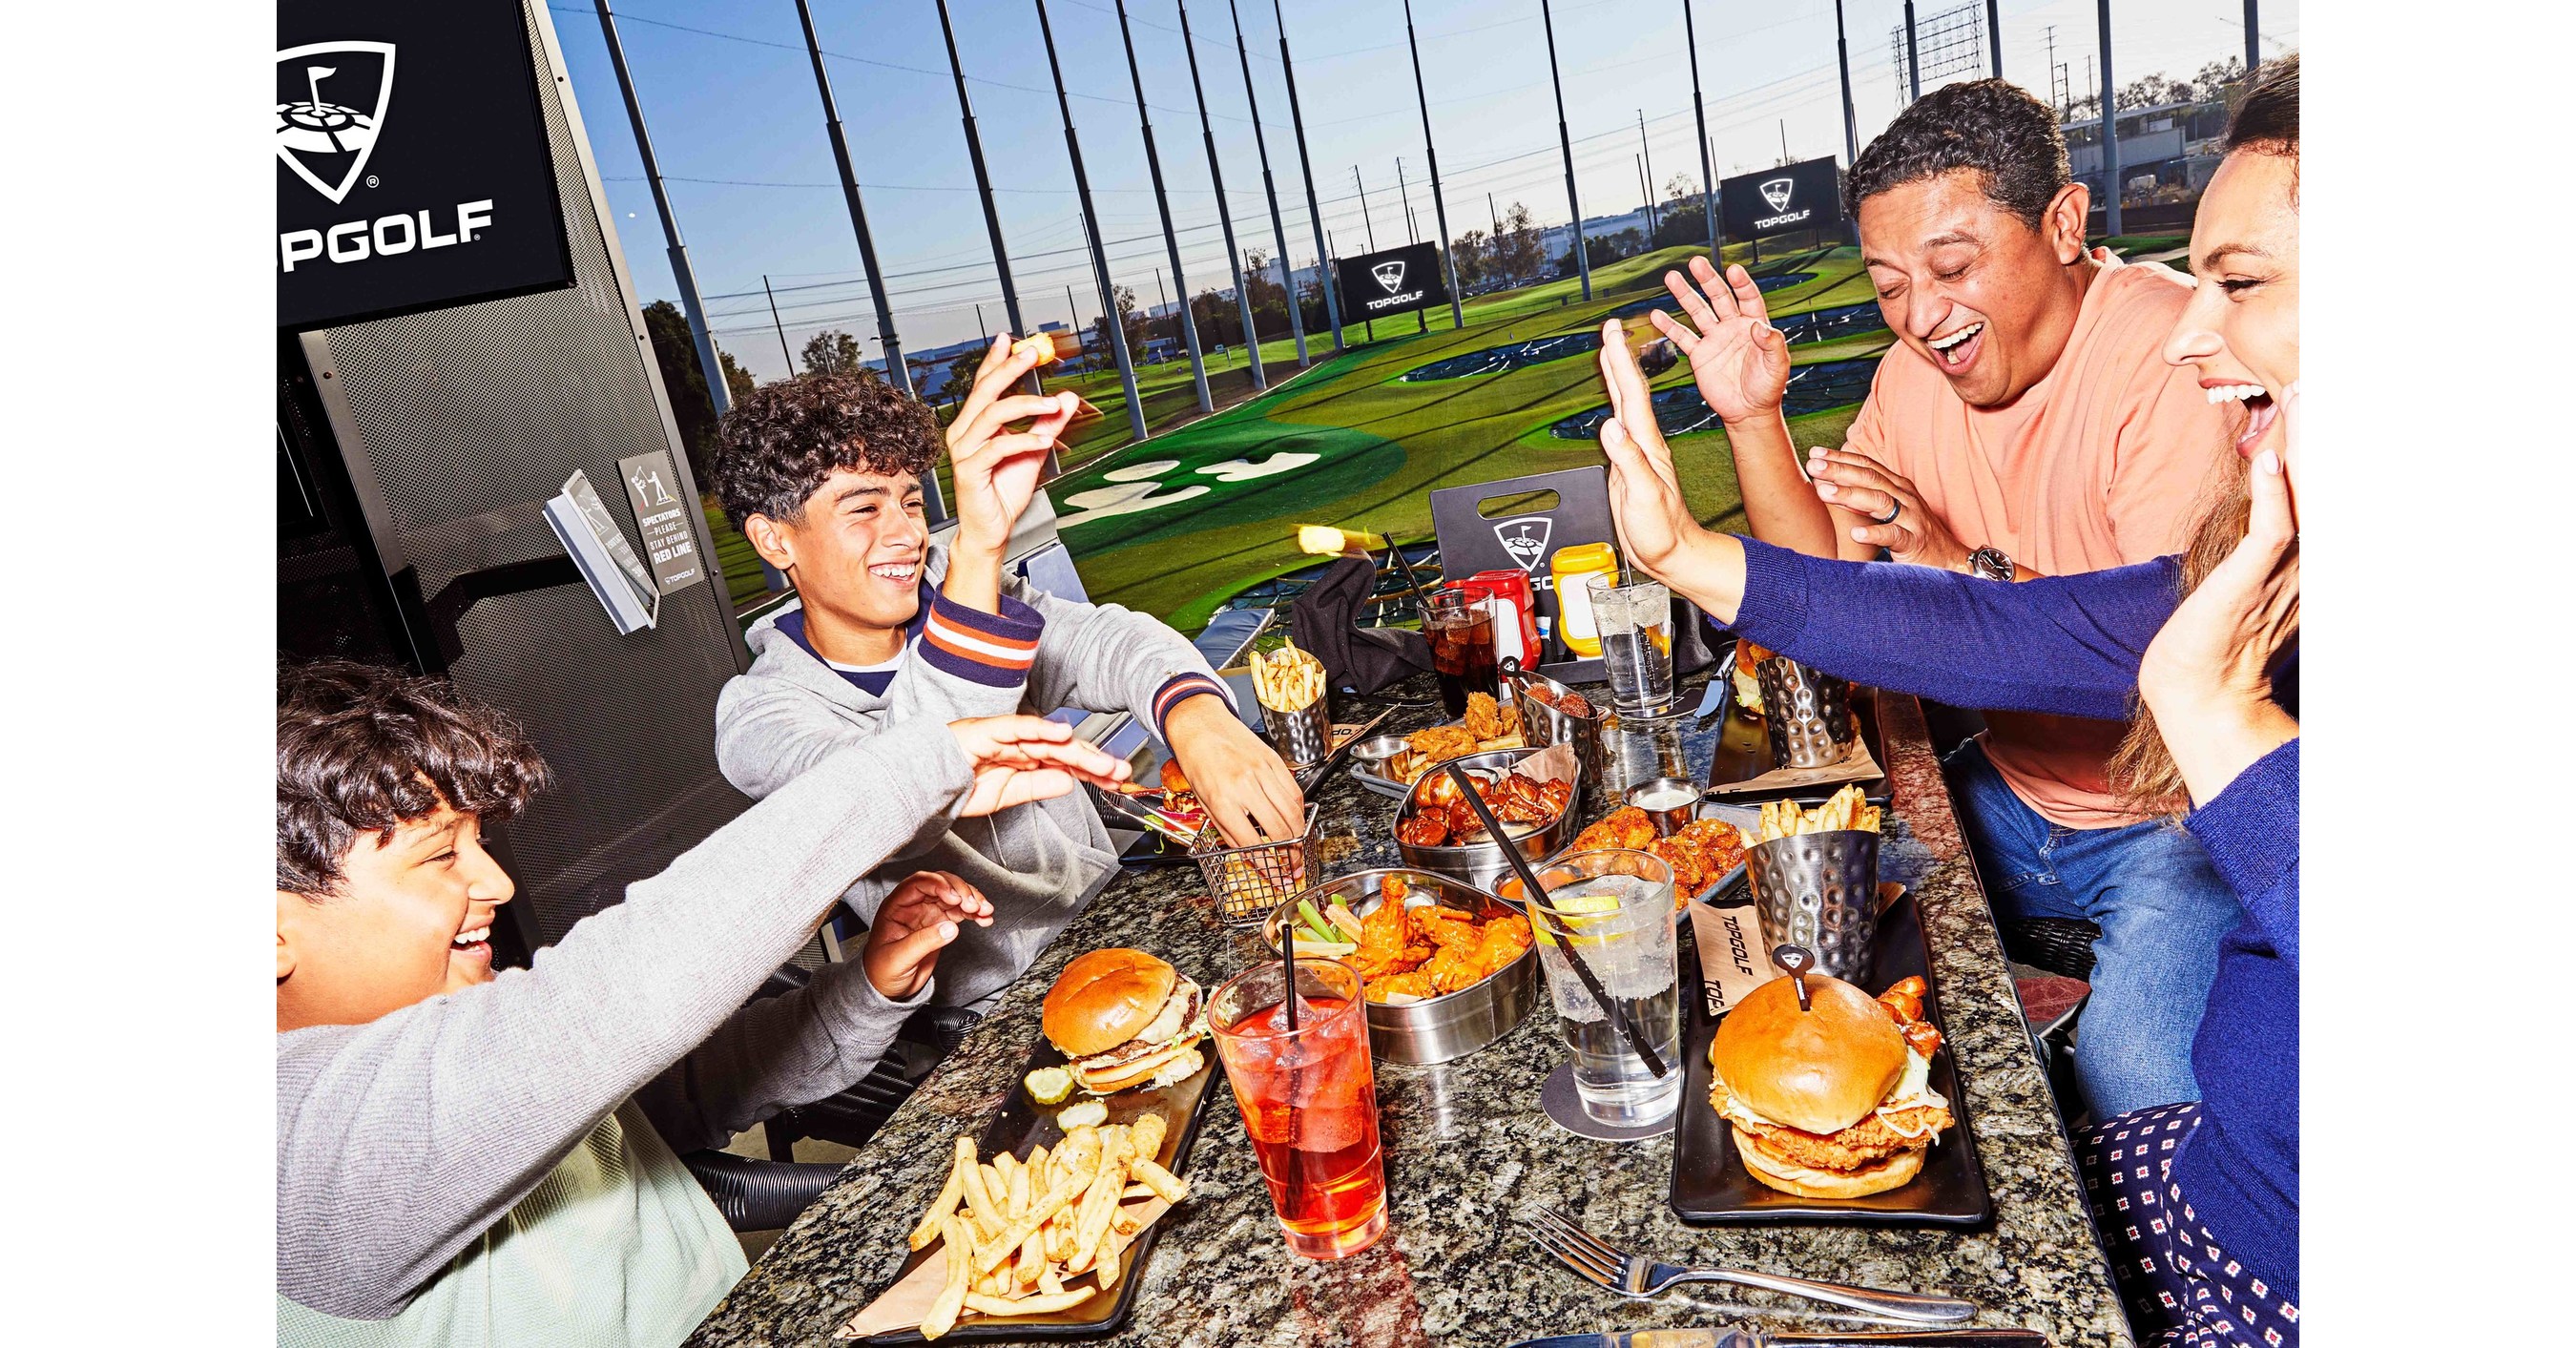 Bring your best energy and come celebrate Mother's Day at Topgolf